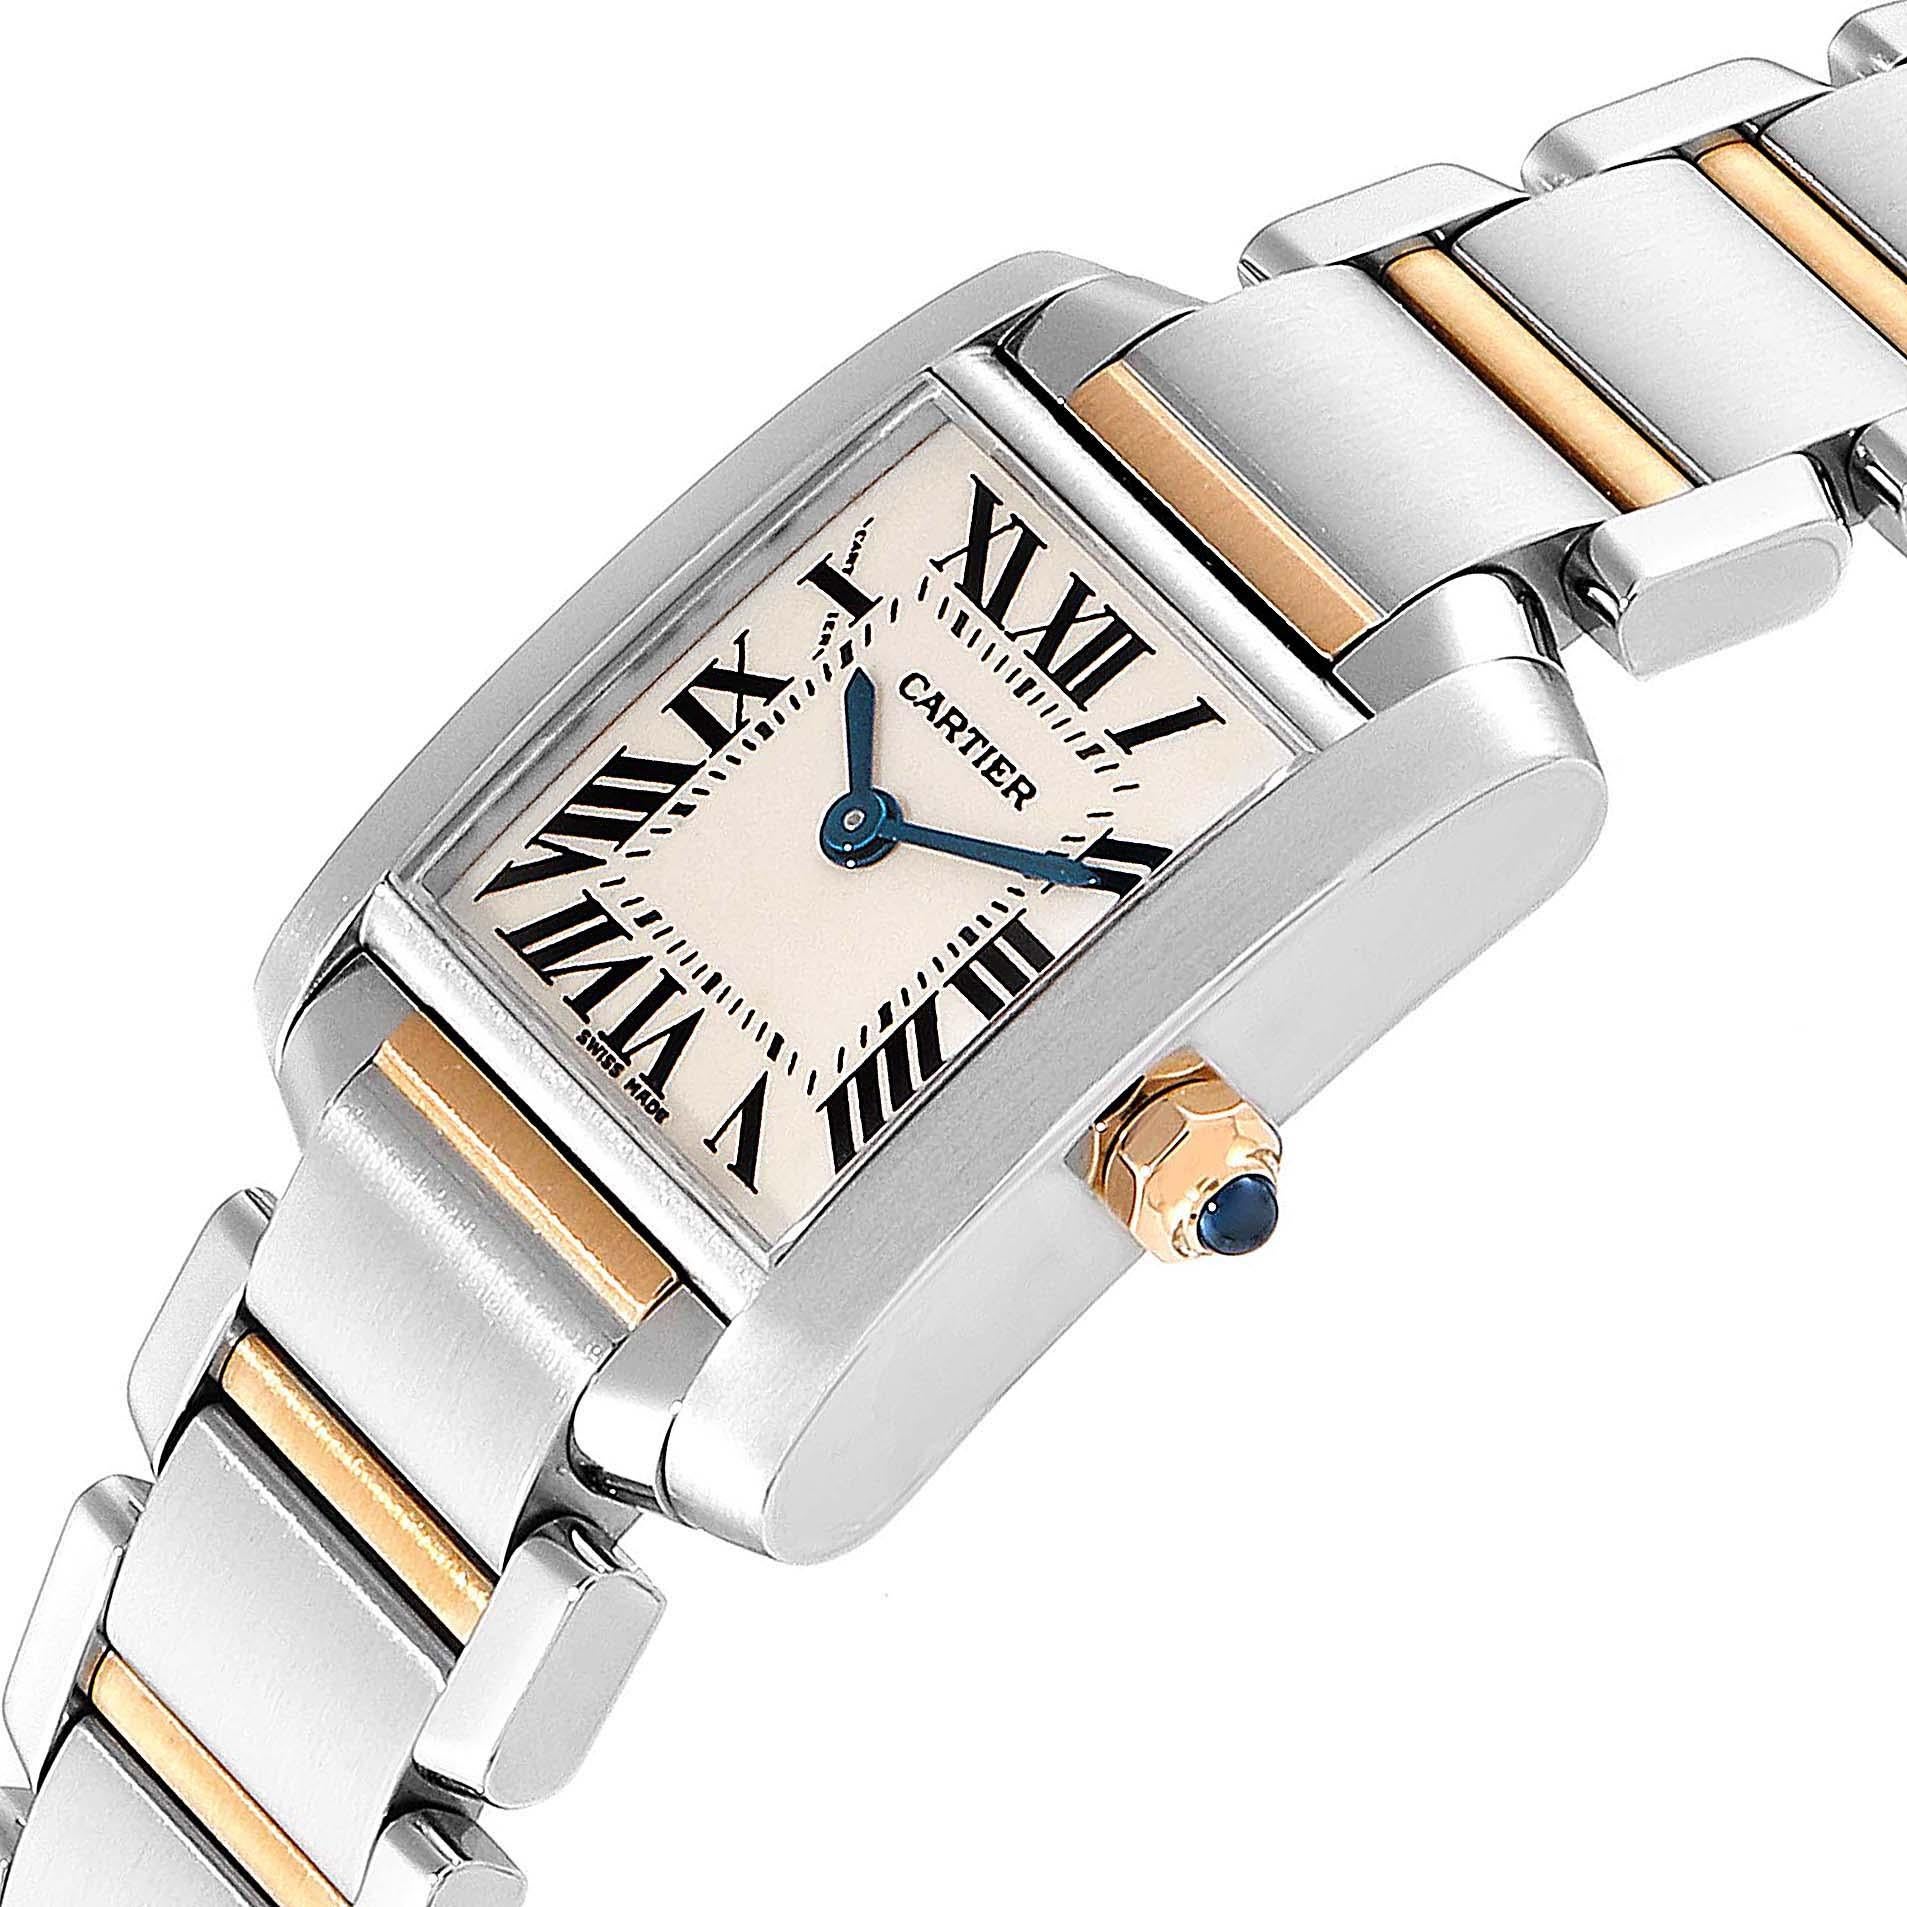 Cartier Tank Francaise Steel Yellow Gold Small Ladies Watch W51007Q4 1